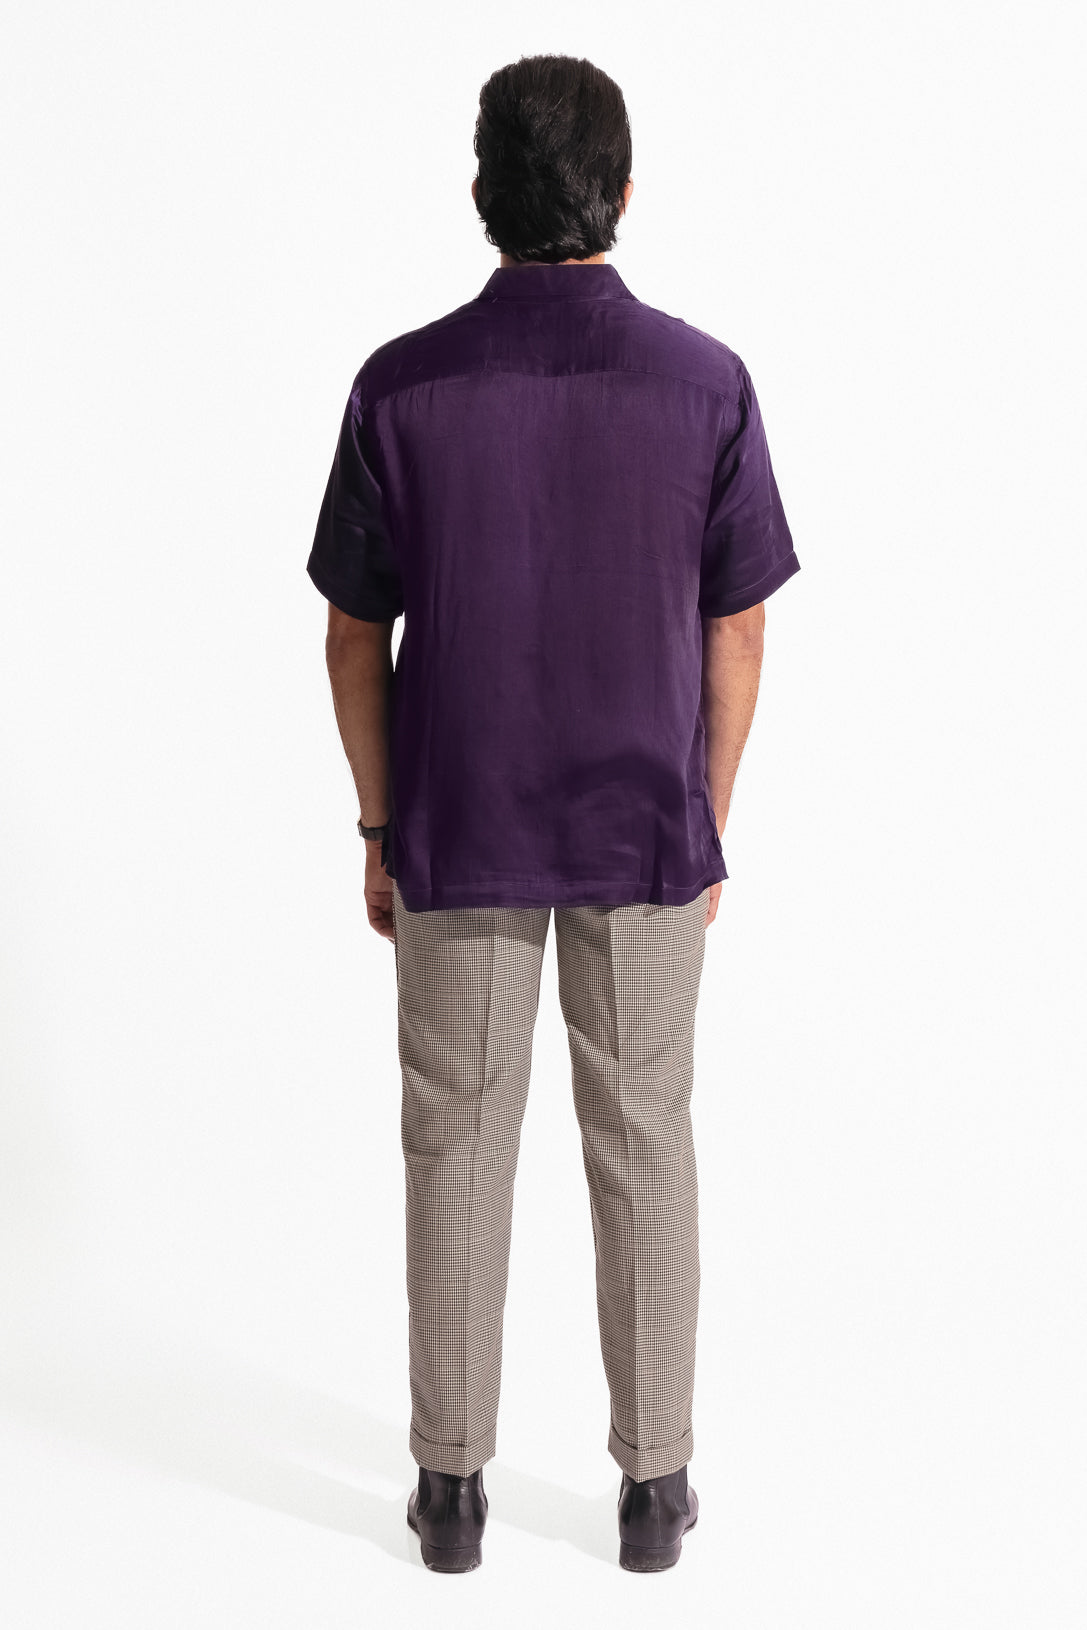 Absolute Purple (Solid) Shirt